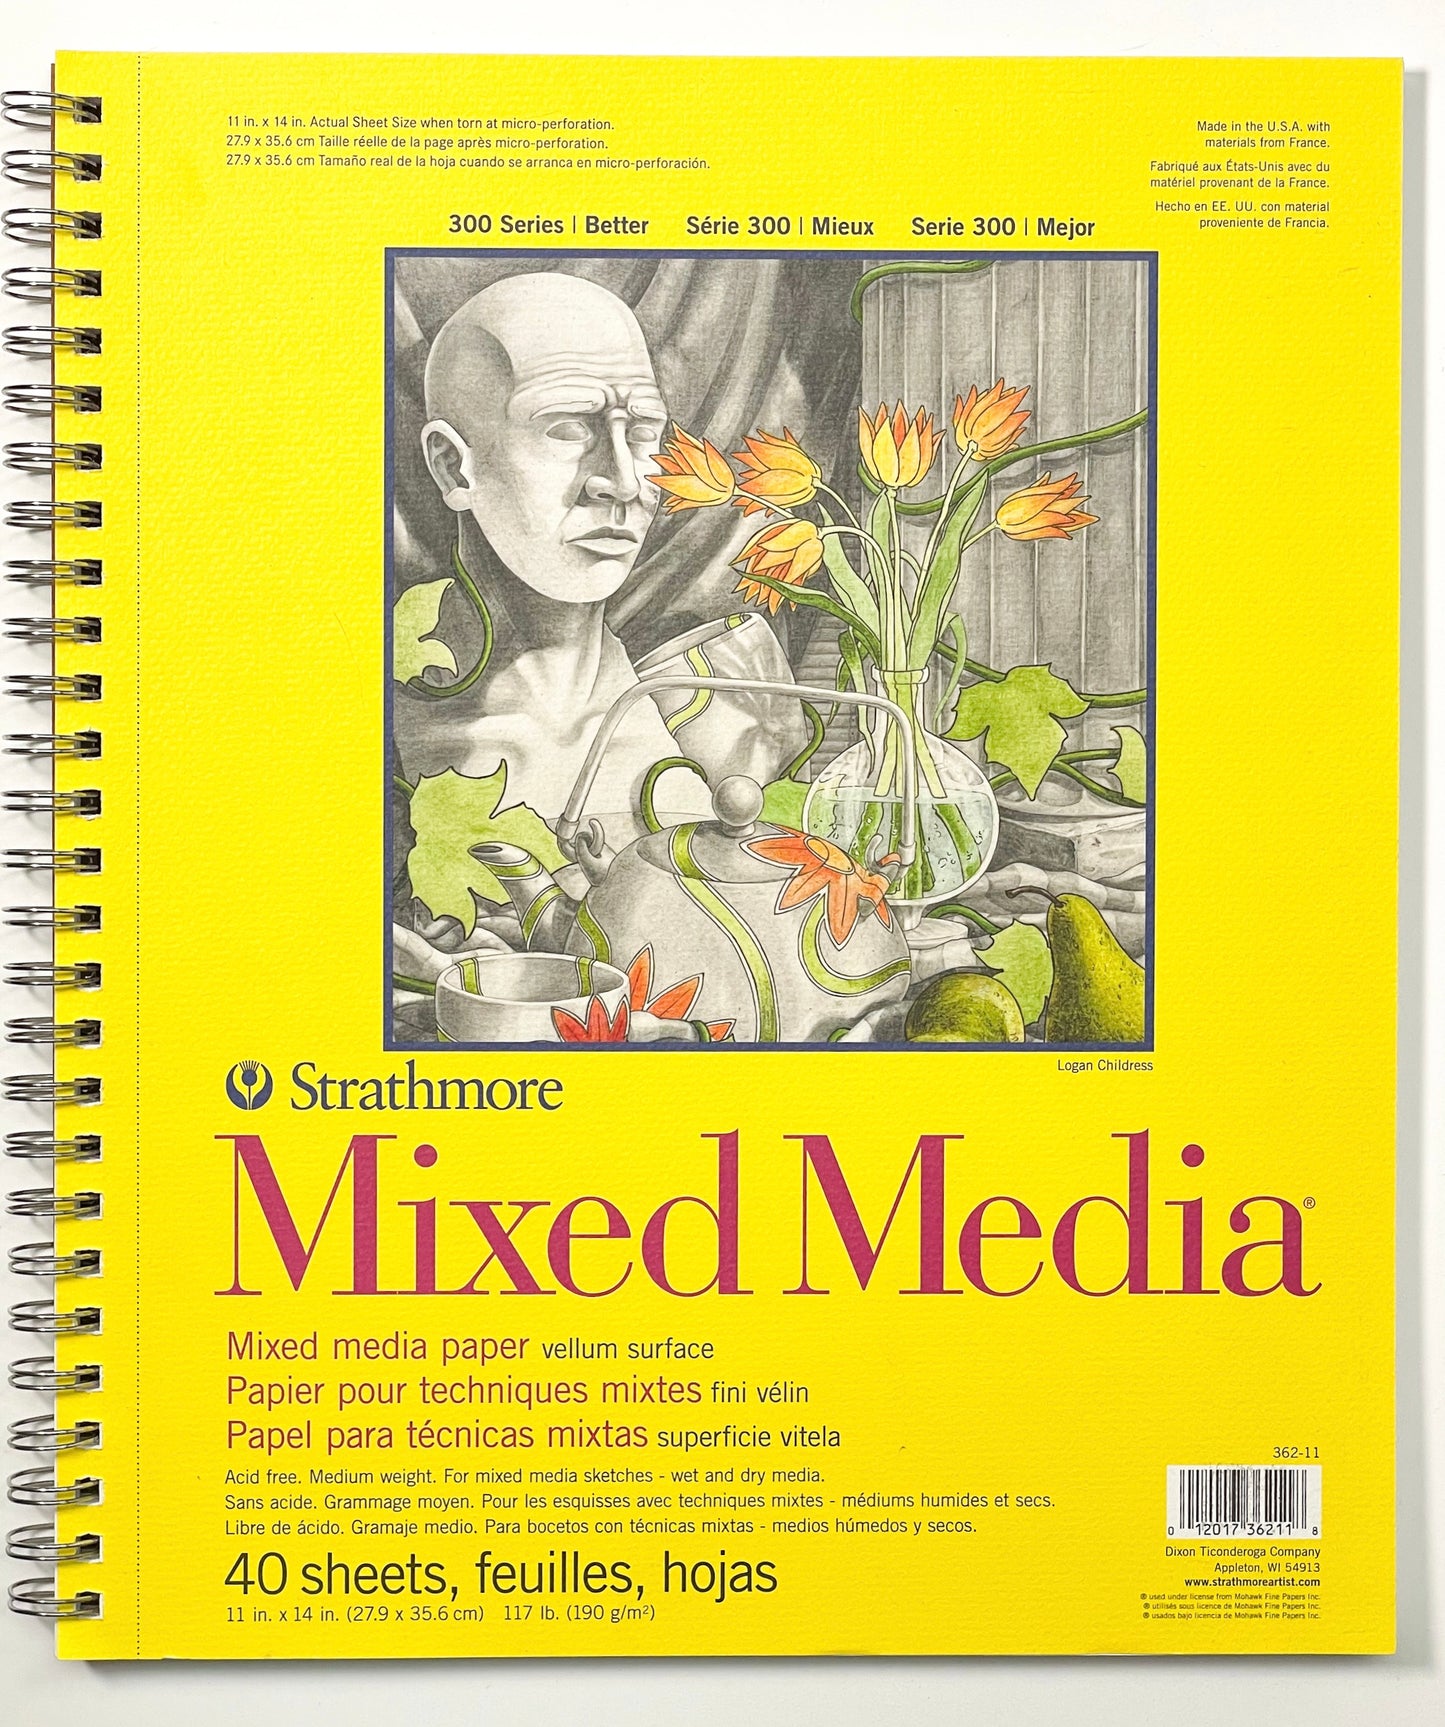 Strathmore 300 Series Mixed Media Sketchbook in size 11"x14"; Mona Lisa Artists' Materials